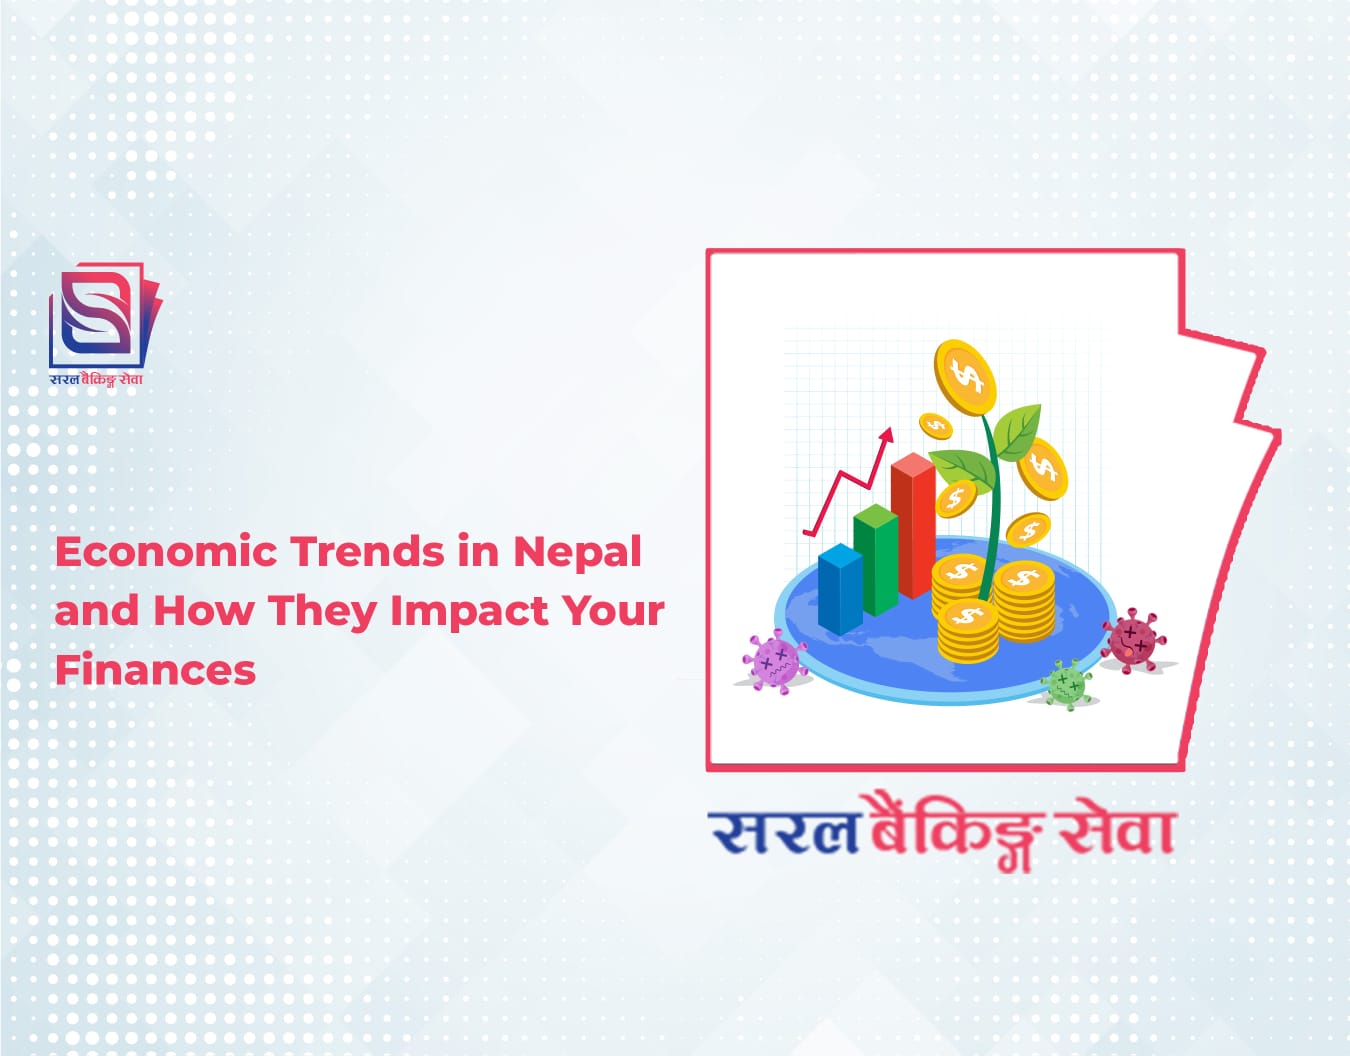 Economic Trends in Nepal and How They Impact Your Finances